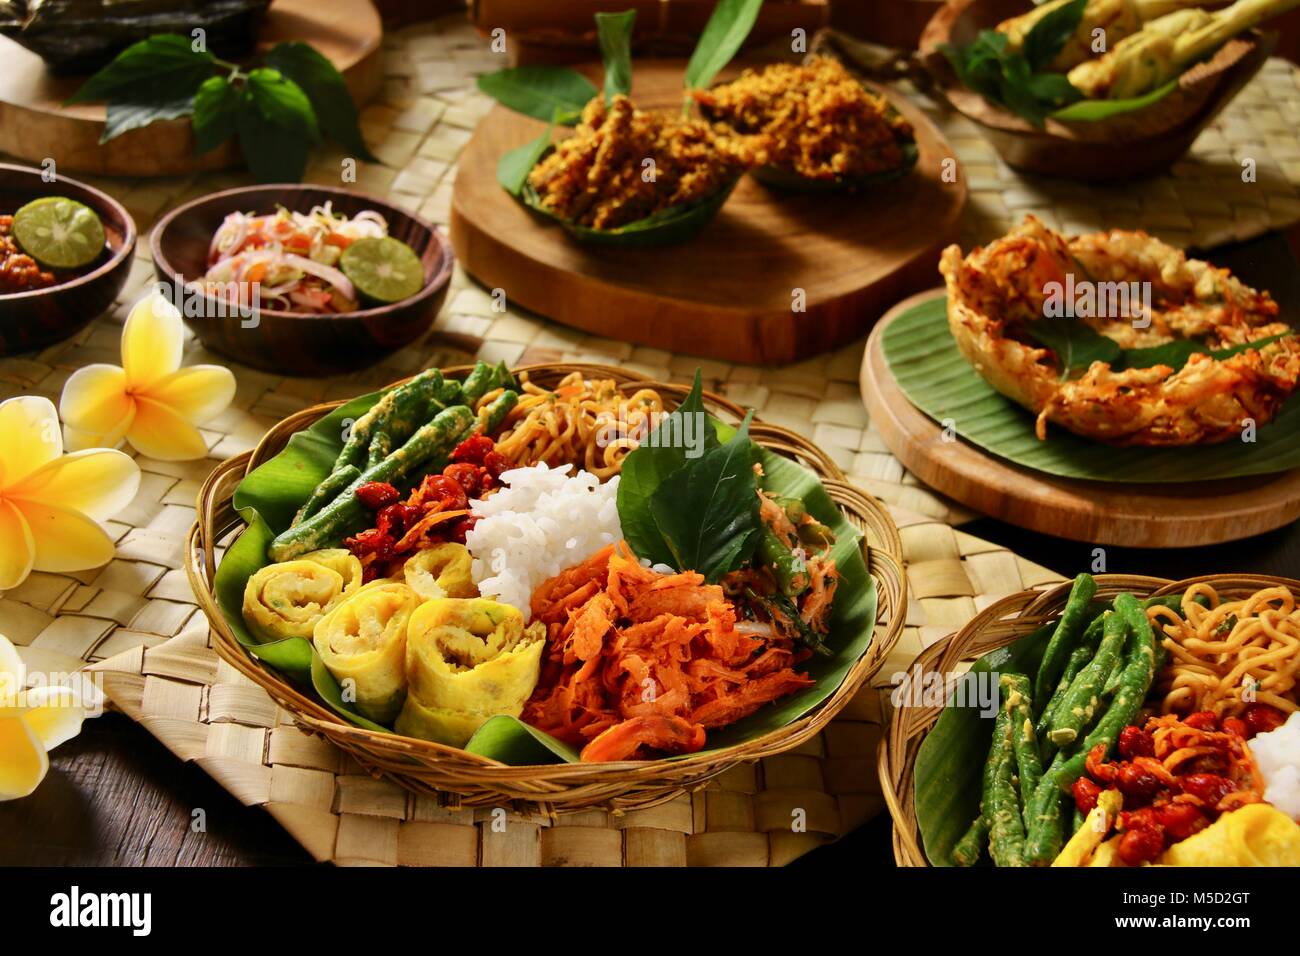 Nasi Campur Bali. Popular traditional Balinese dish of steamed rice served with various side dishes. Stock Photo